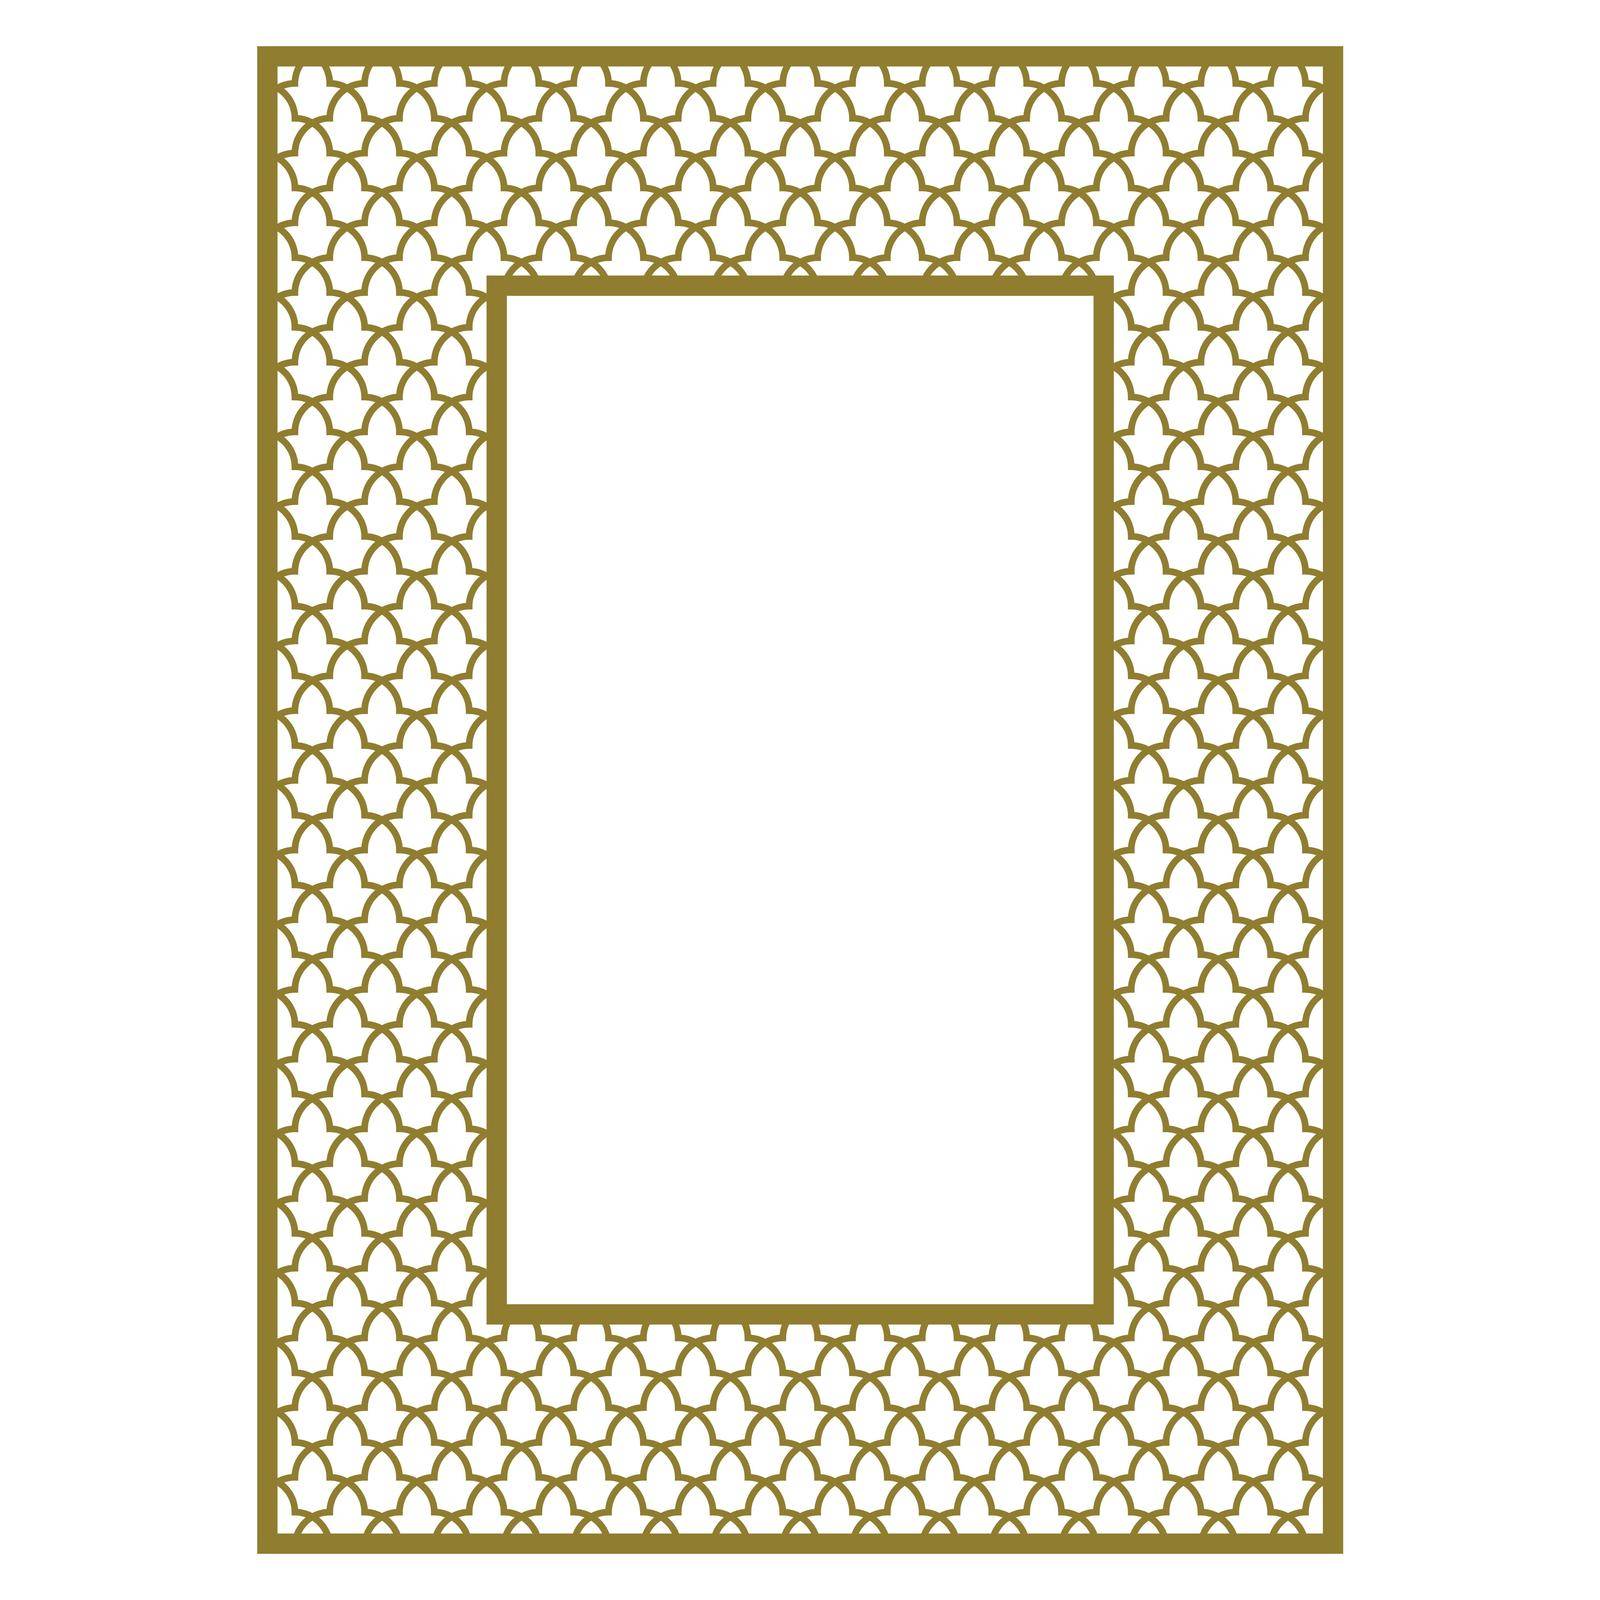 Decorative rectangular frame with an ornament in Arabic style. by ALYOHA